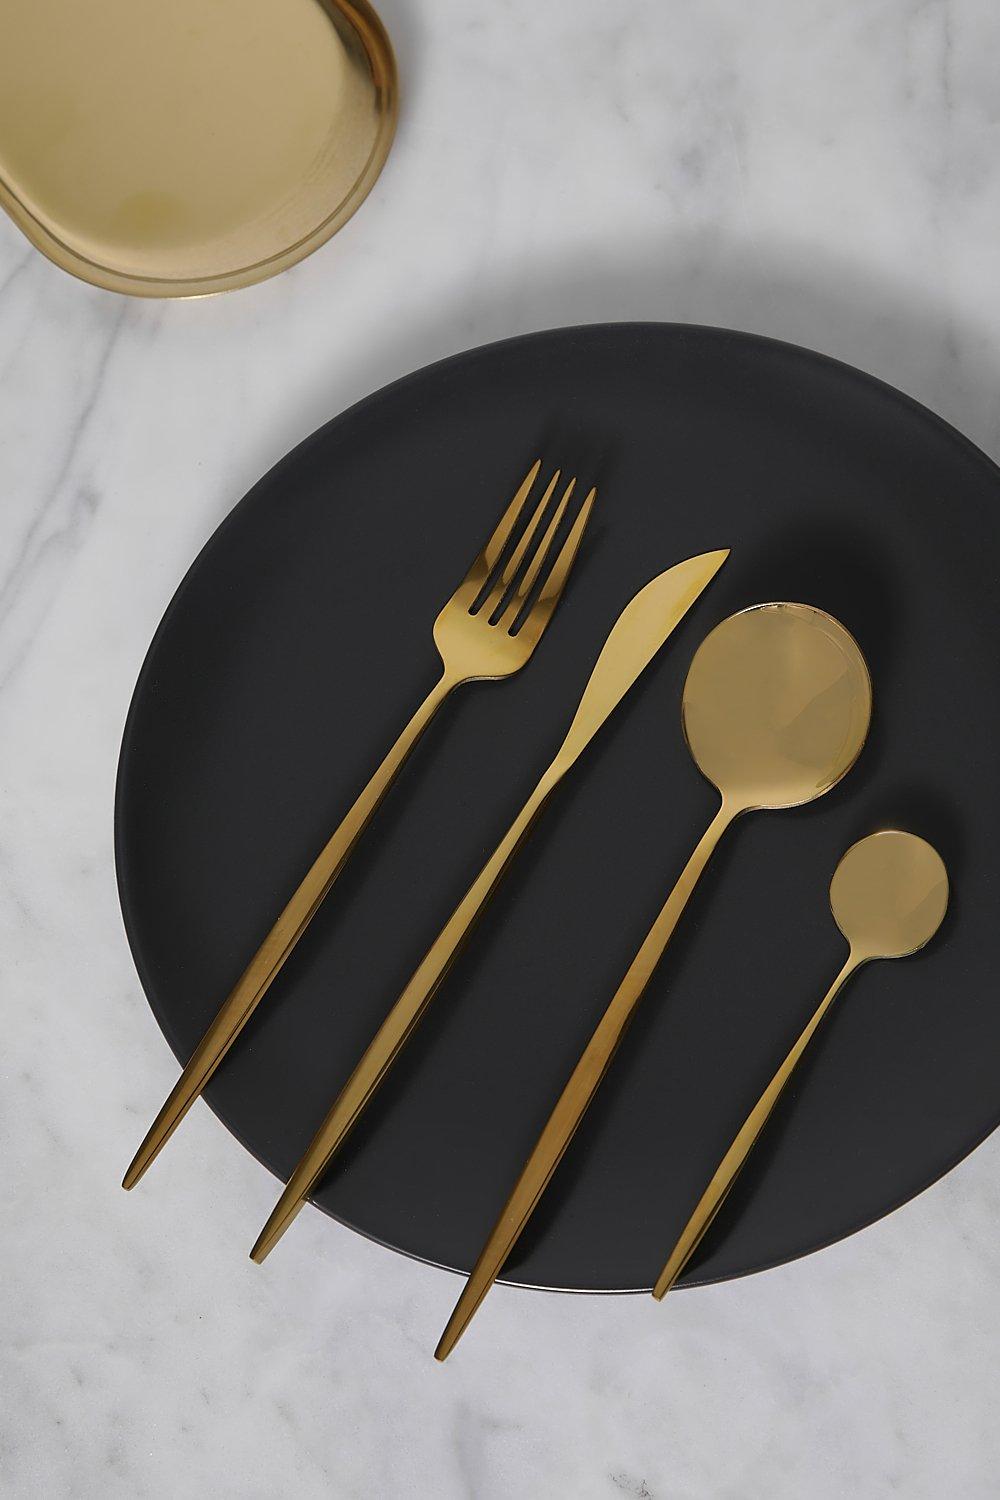 Boohoo Gold Cutlery 4 Pc Set  - Size: ONE SIZE